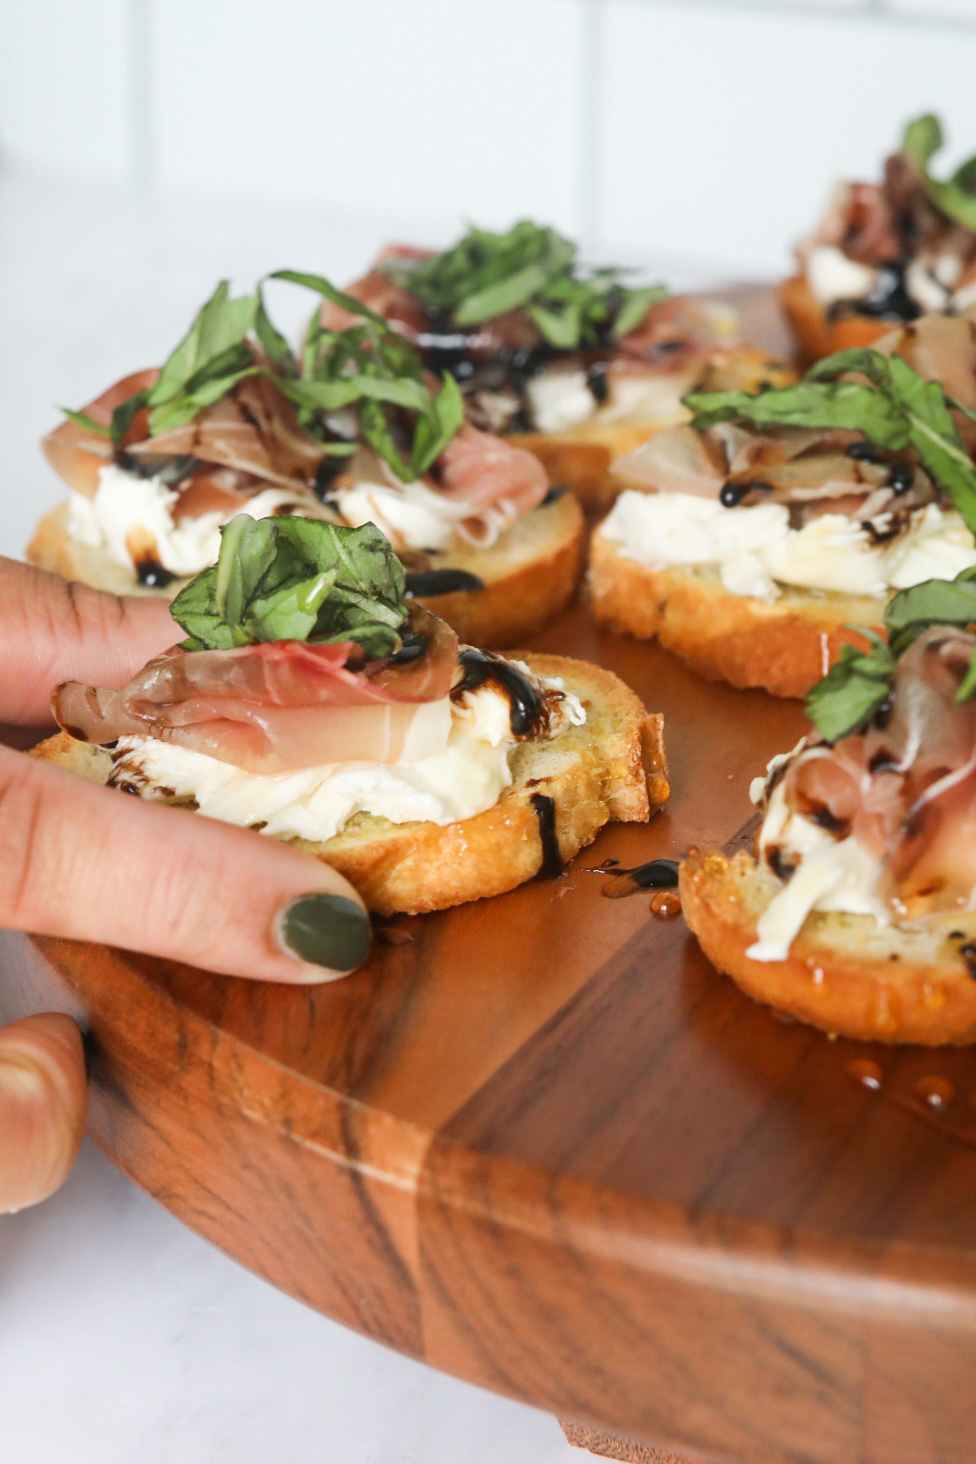 Hand picking up prosciutto crostini staged on a wooden charcuterie style board. Angle is slightly on the left-hand side with the hand picking up the toast point.